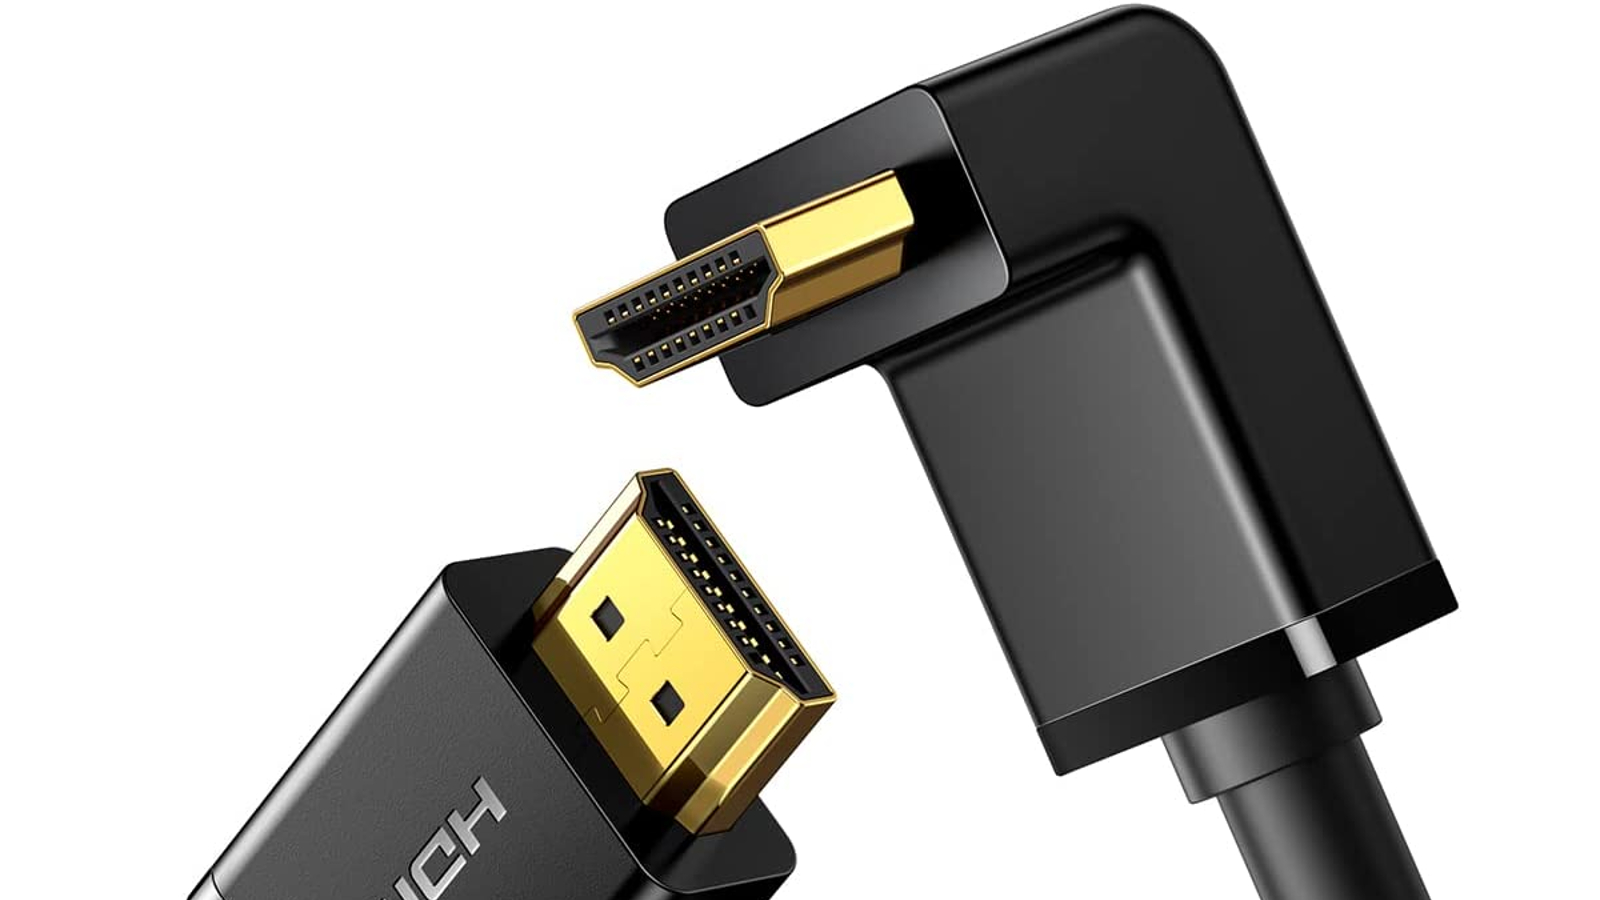 UGreen 90-Degree HDMI Cable - Best for tight spaces